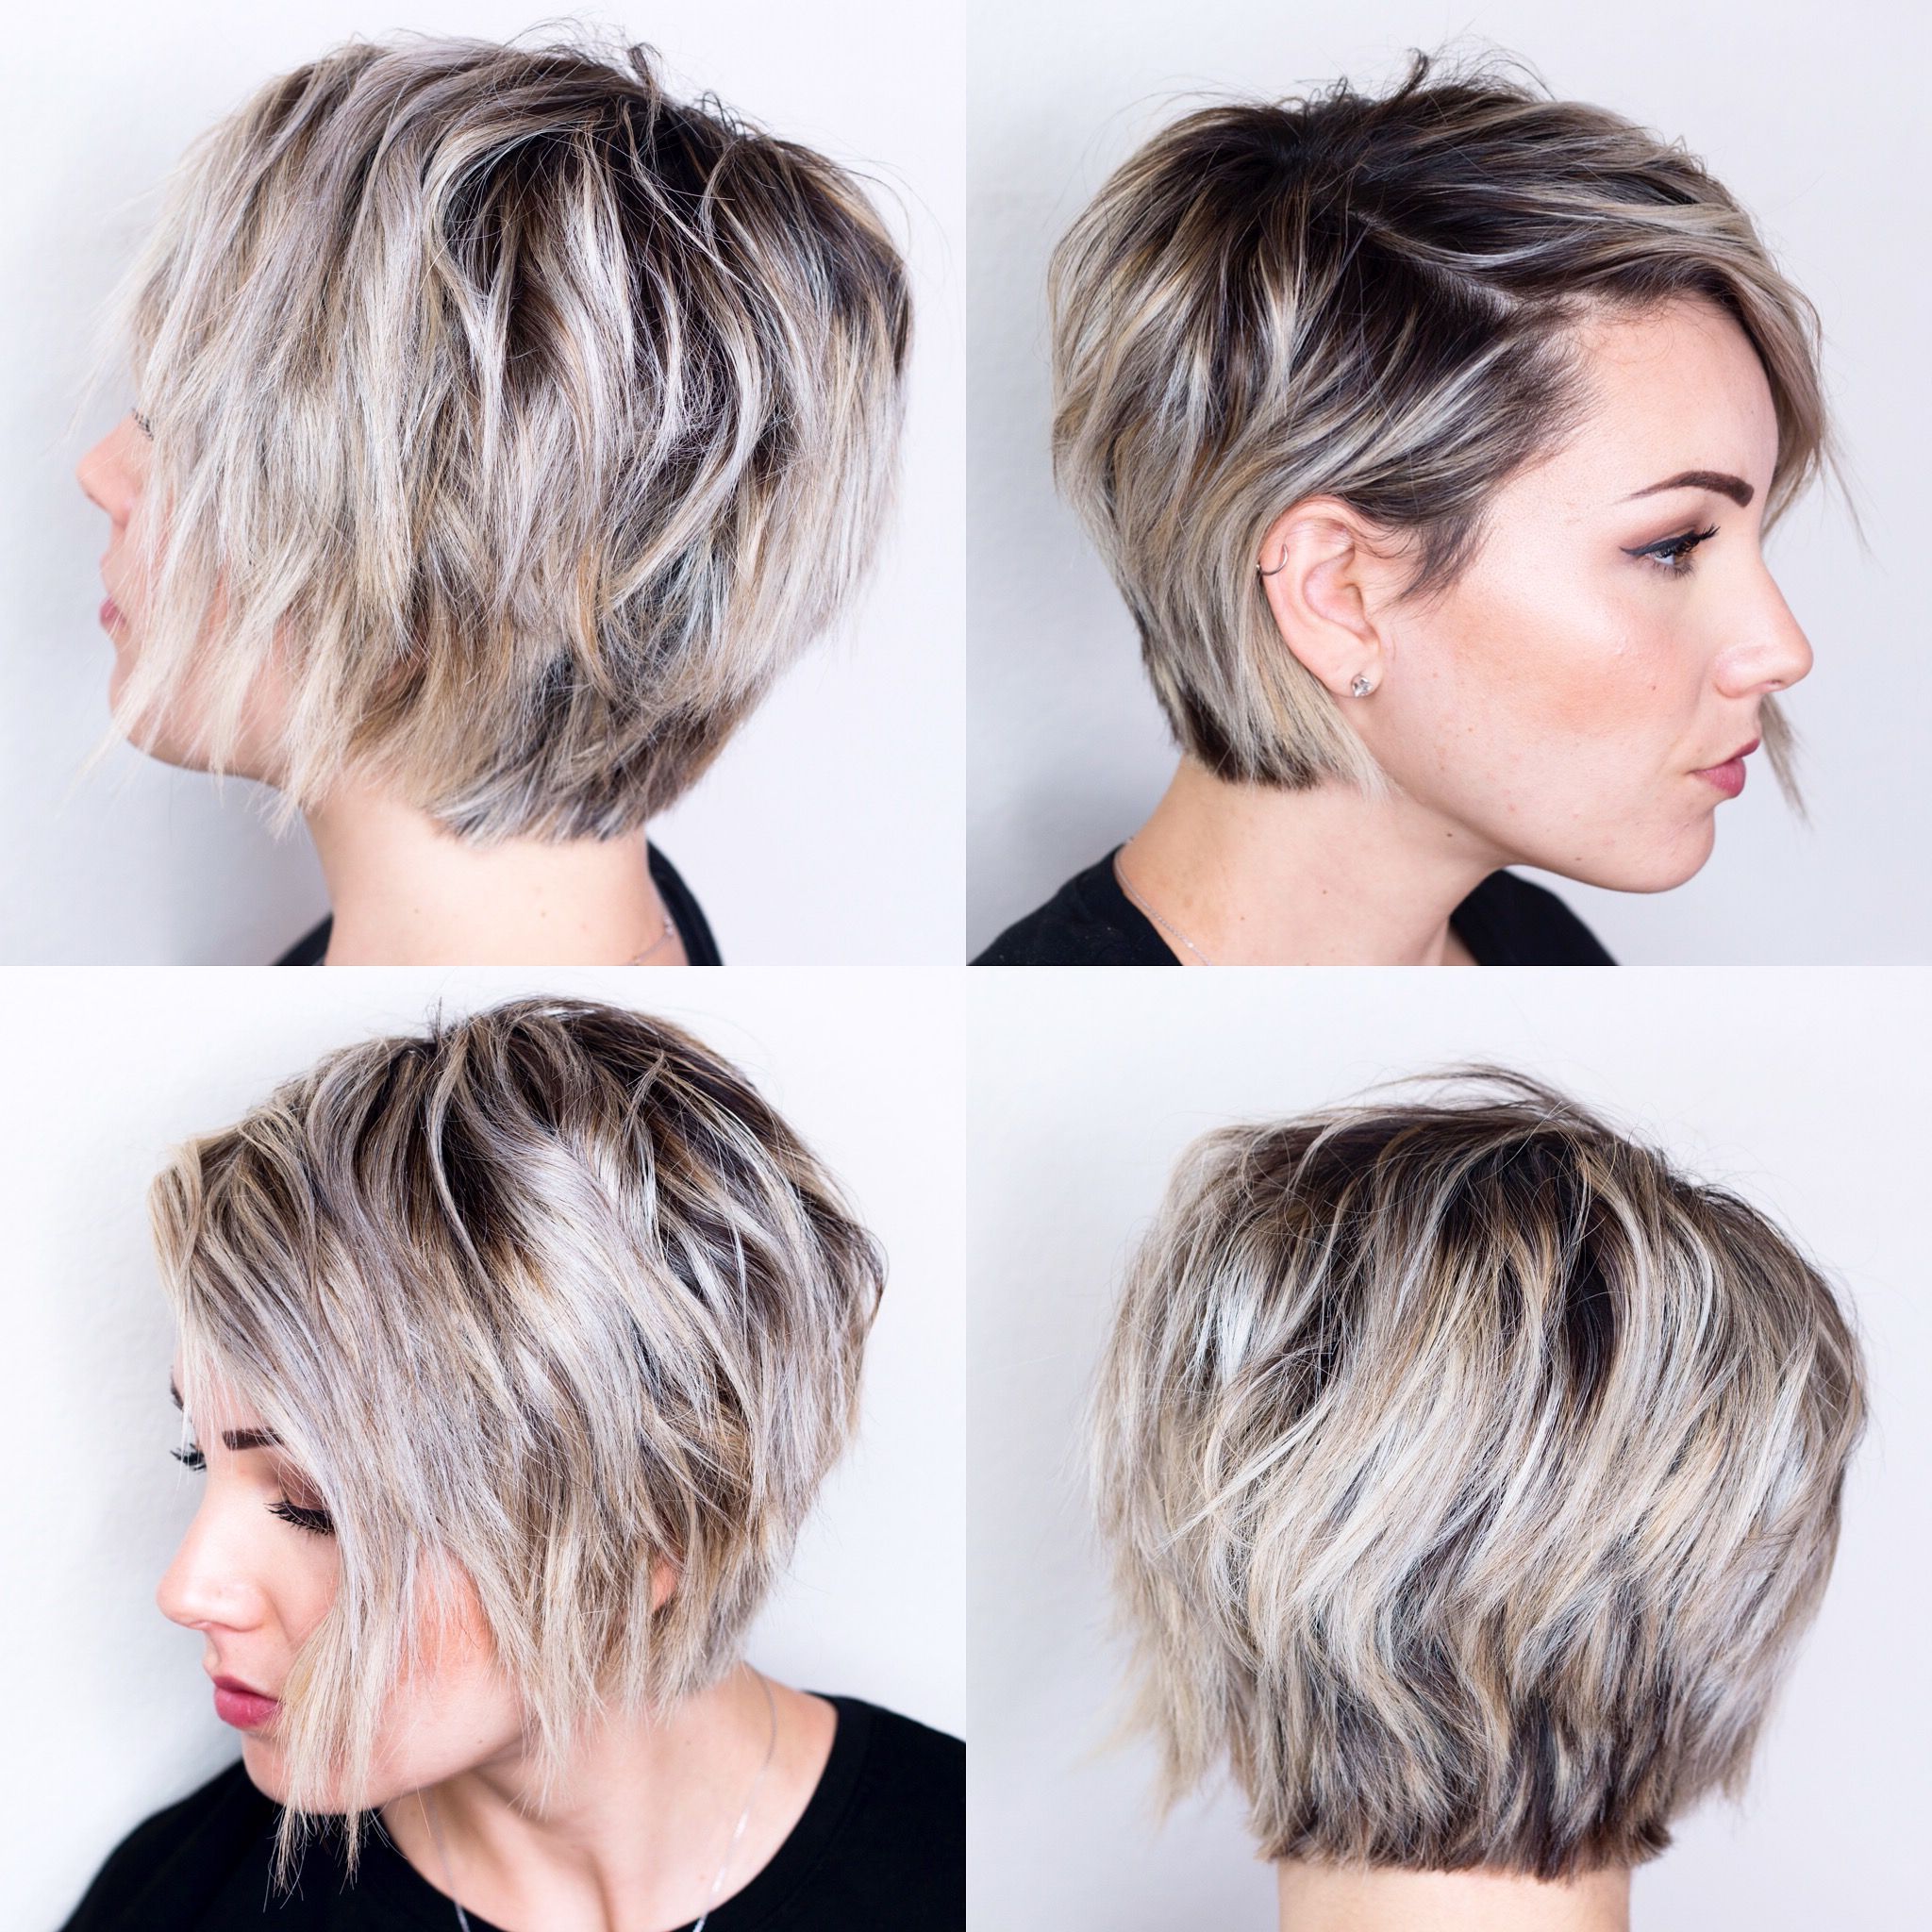 360 View Of Short Hair | H A I R In 2018 | Pinterest | Short Hair Inside Short Hairstyles For Women With Oval Faces (View 3 of 25)